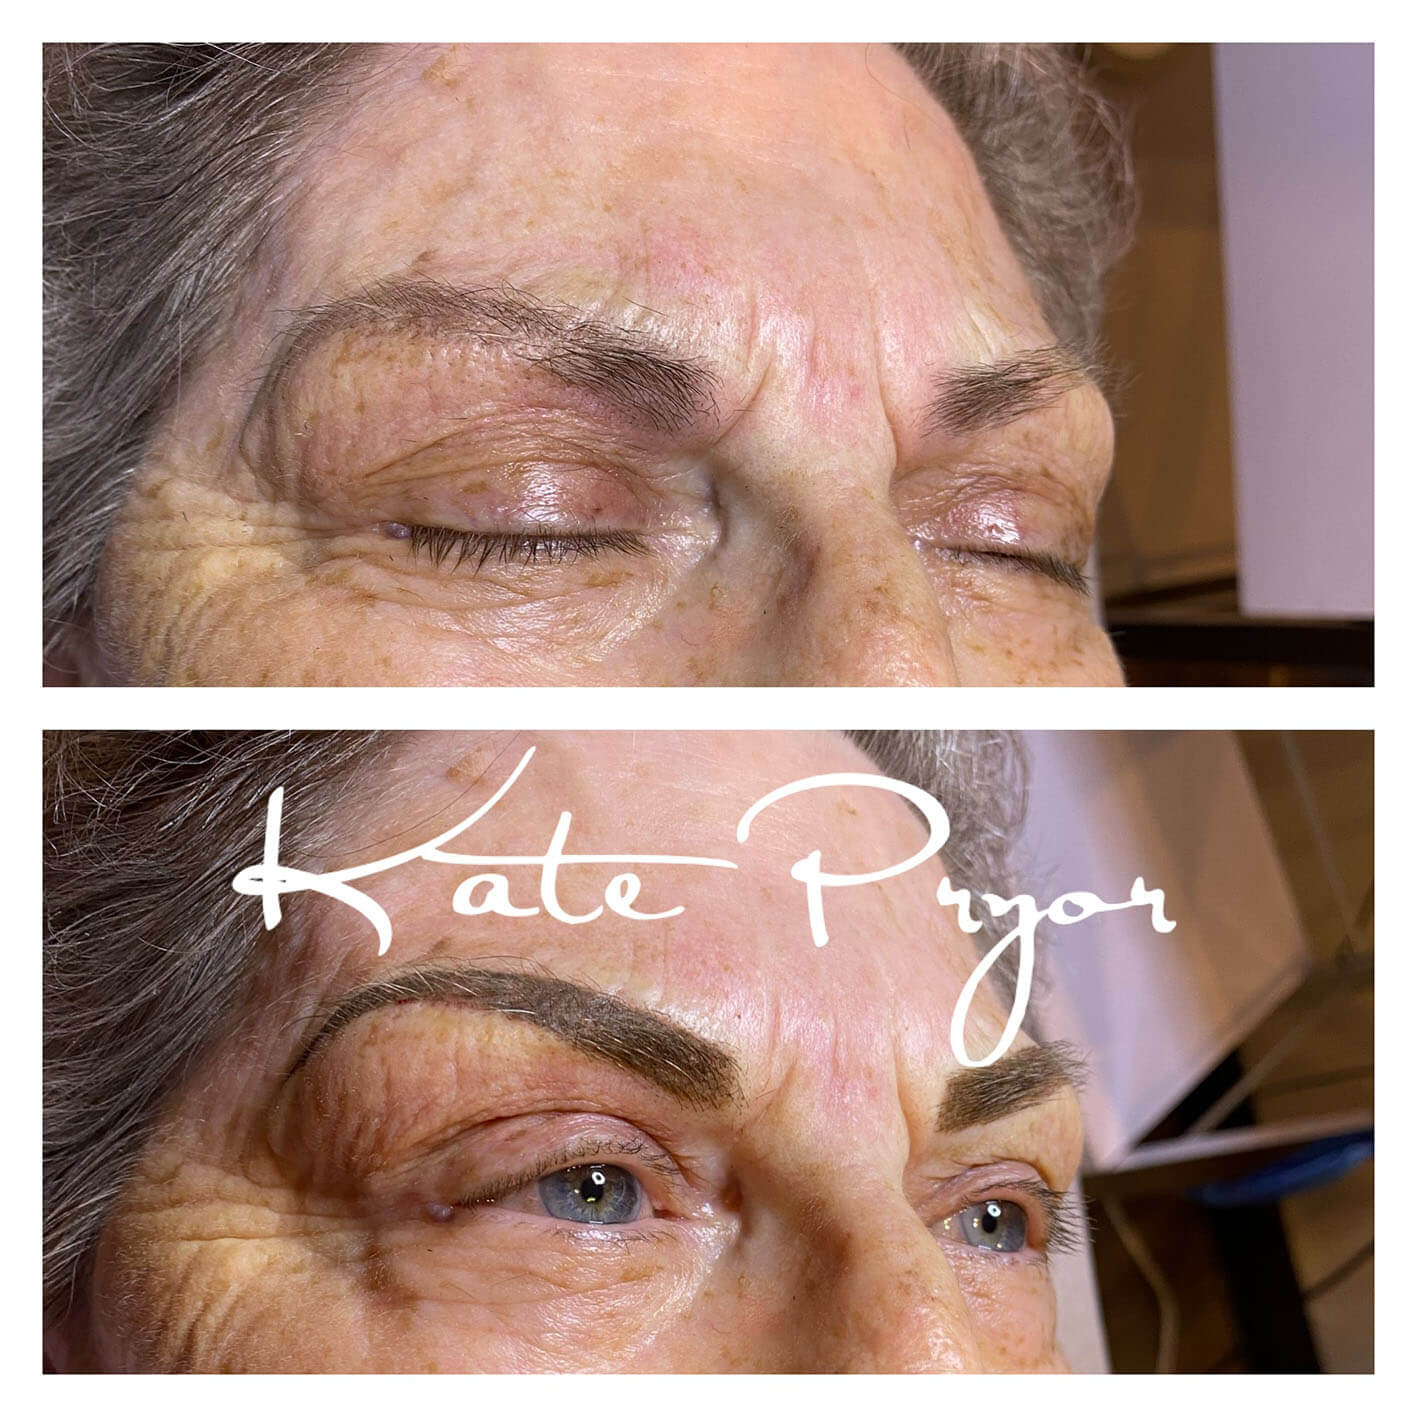 Elite-Skin-Cosmetic-Tattooing-Kate-Pryor-Before-After-2